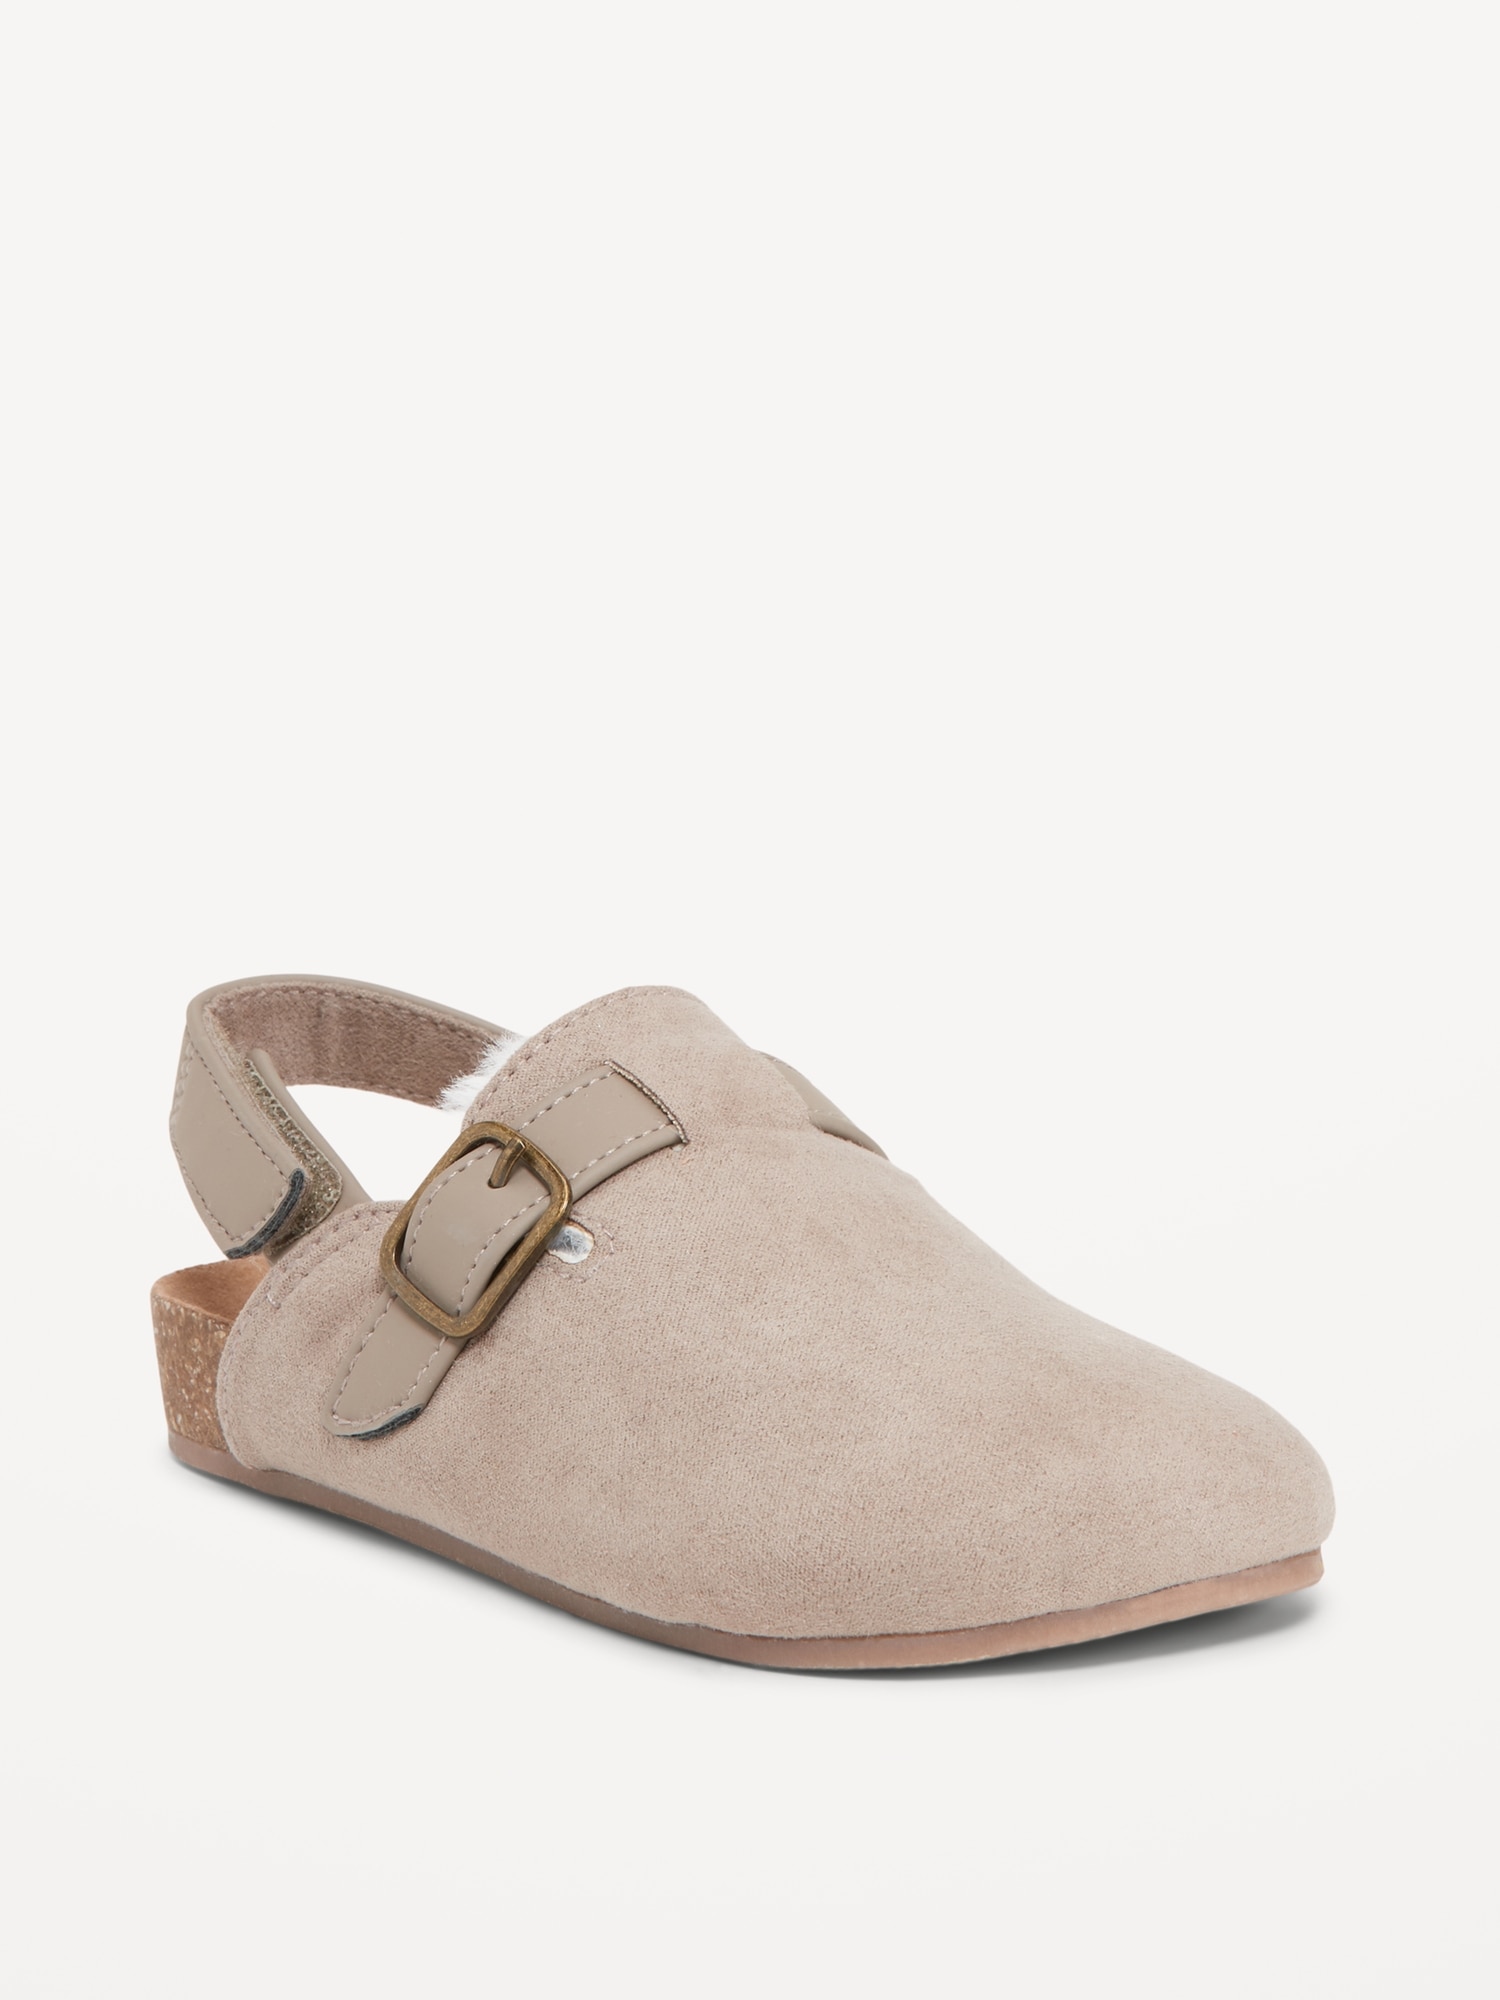 Faux-Suede Faux-Fur-Lined Clog Shoes for Toddler Girls